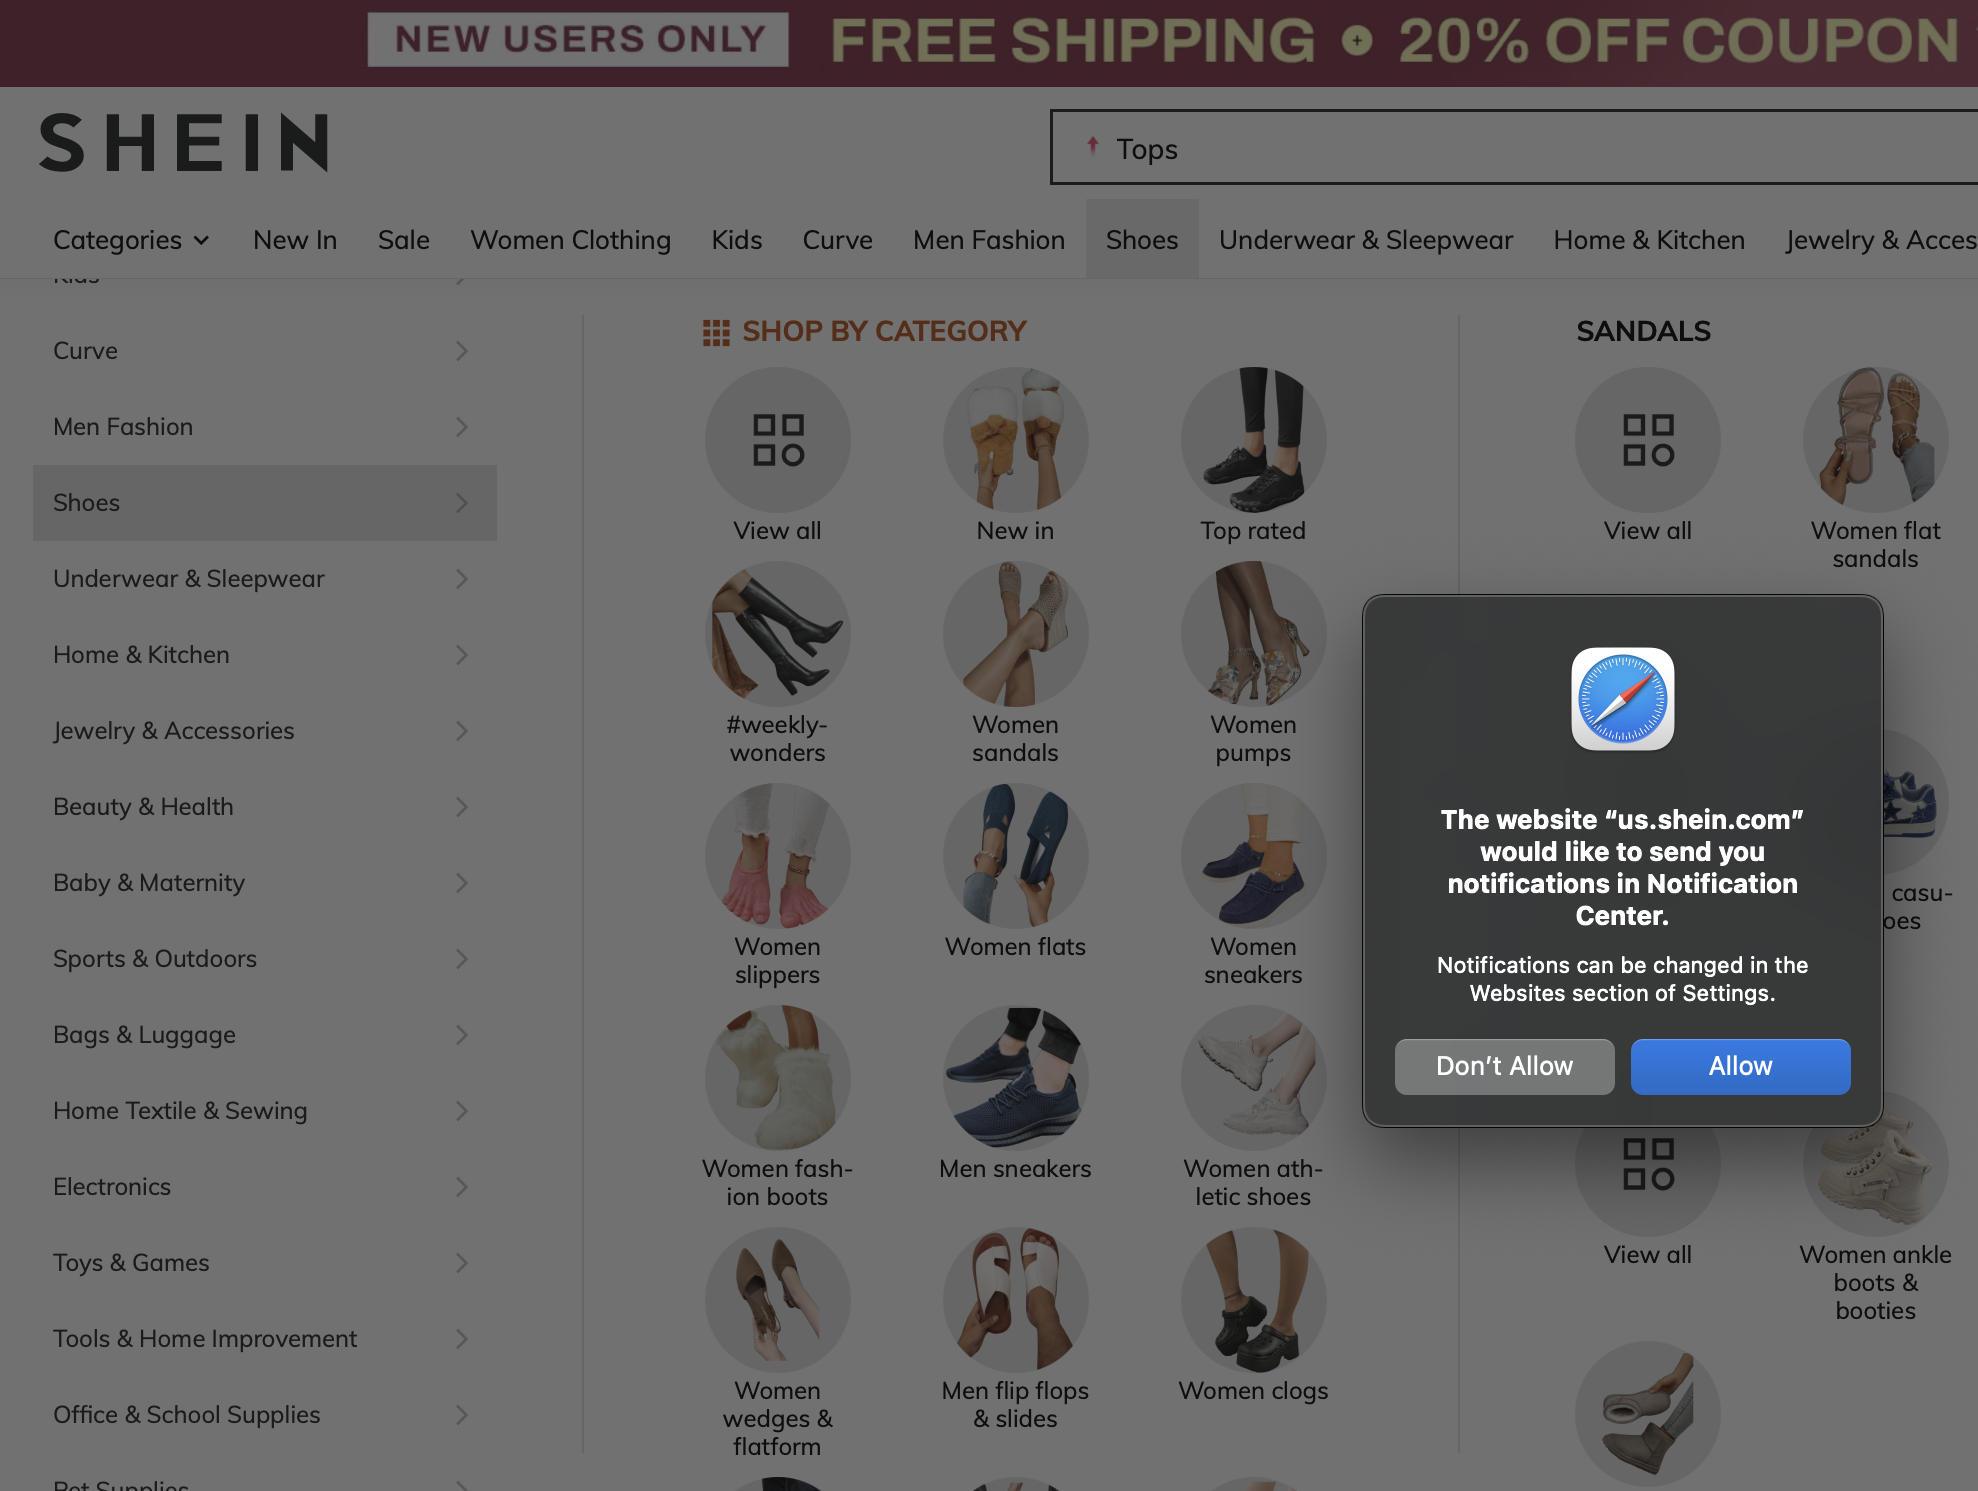 ecommerce website features push notifications - 29 Must-Have Features For Ecommerce Websites